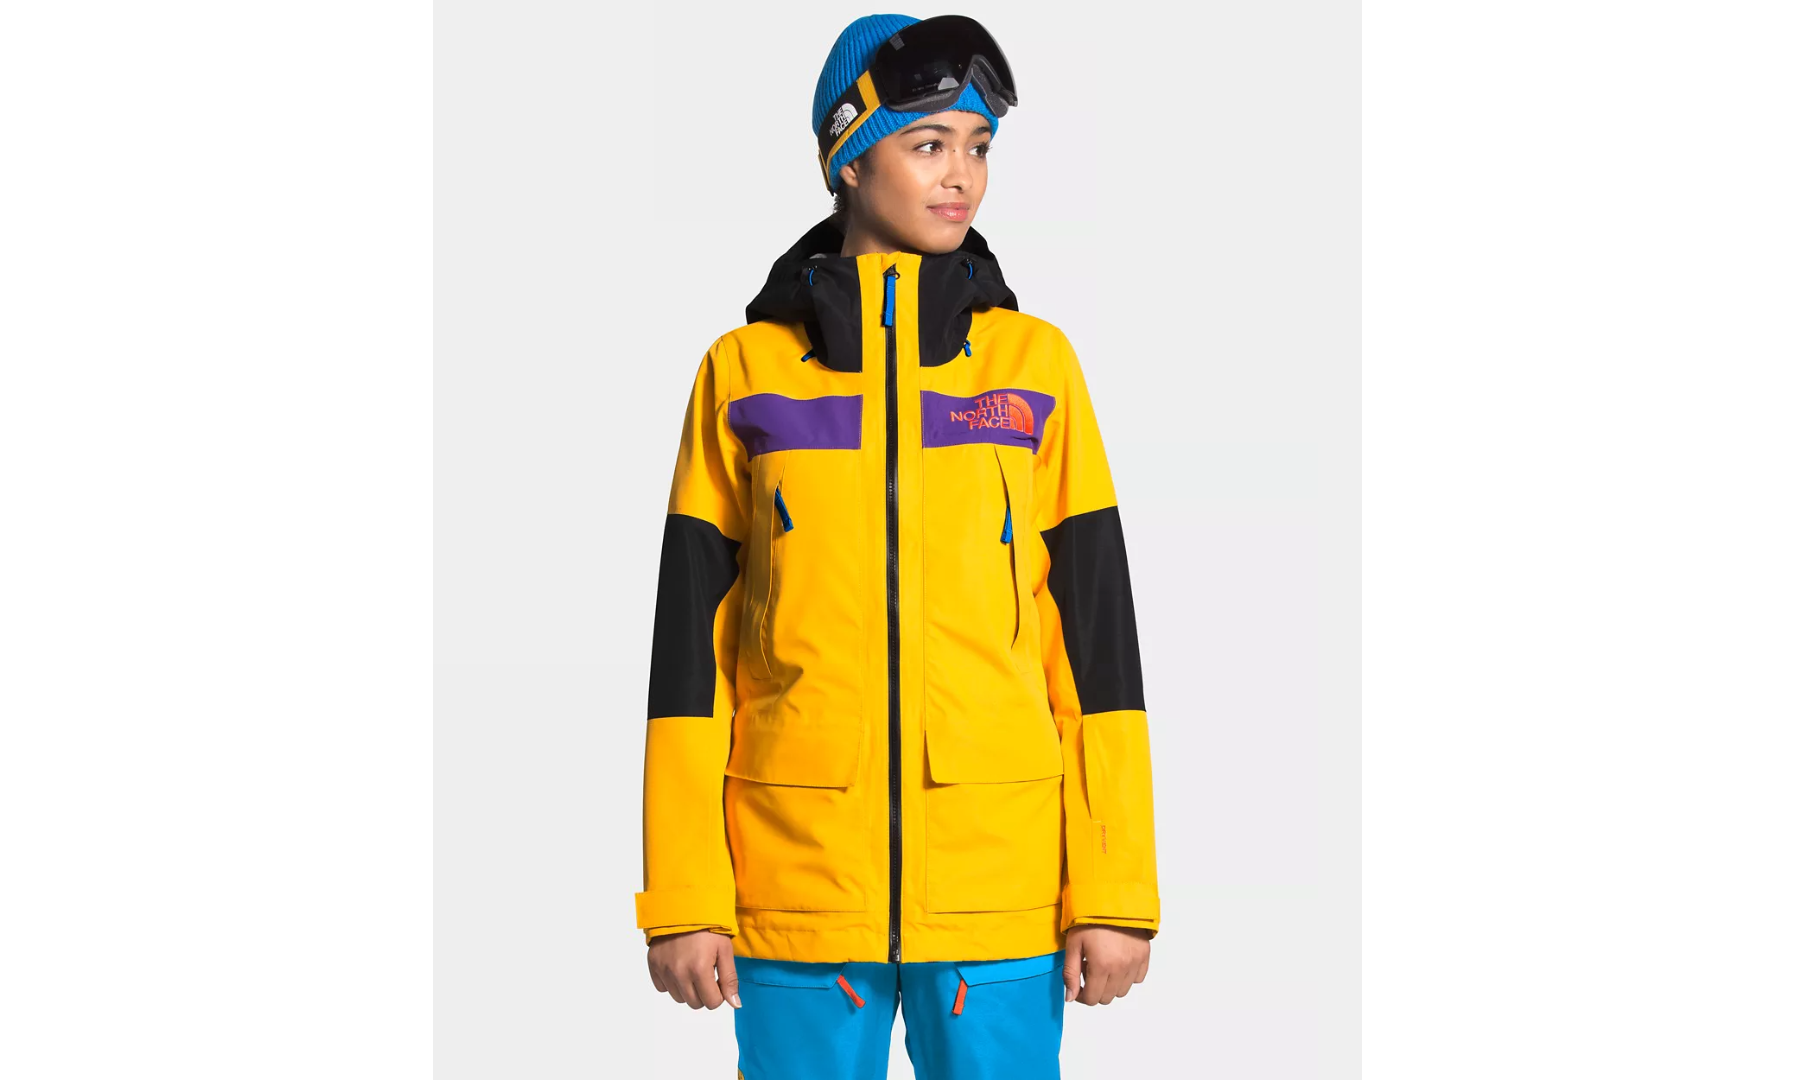 jack north face